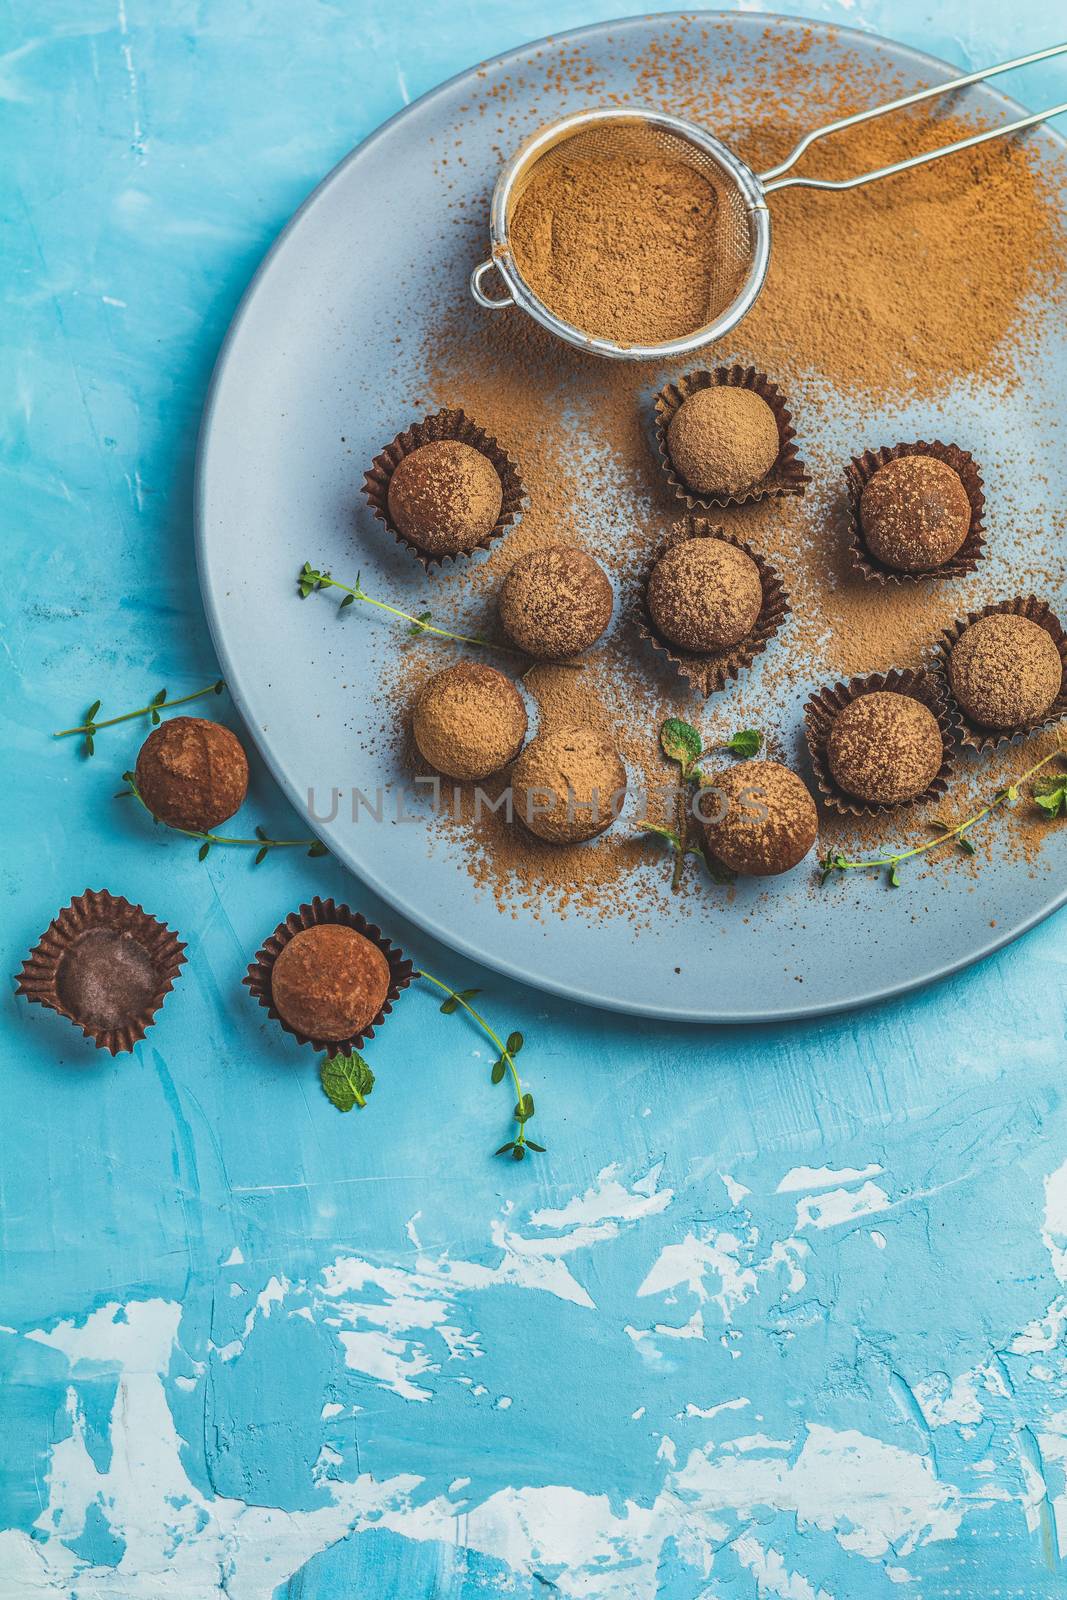 Cocoa balls, handmade chocolate balls cakes in a blue tray, sprinkled with cocoa powder, fresh mint and thyme on dark blue concrete surface background. Close up, copy space, shallow depth of the field